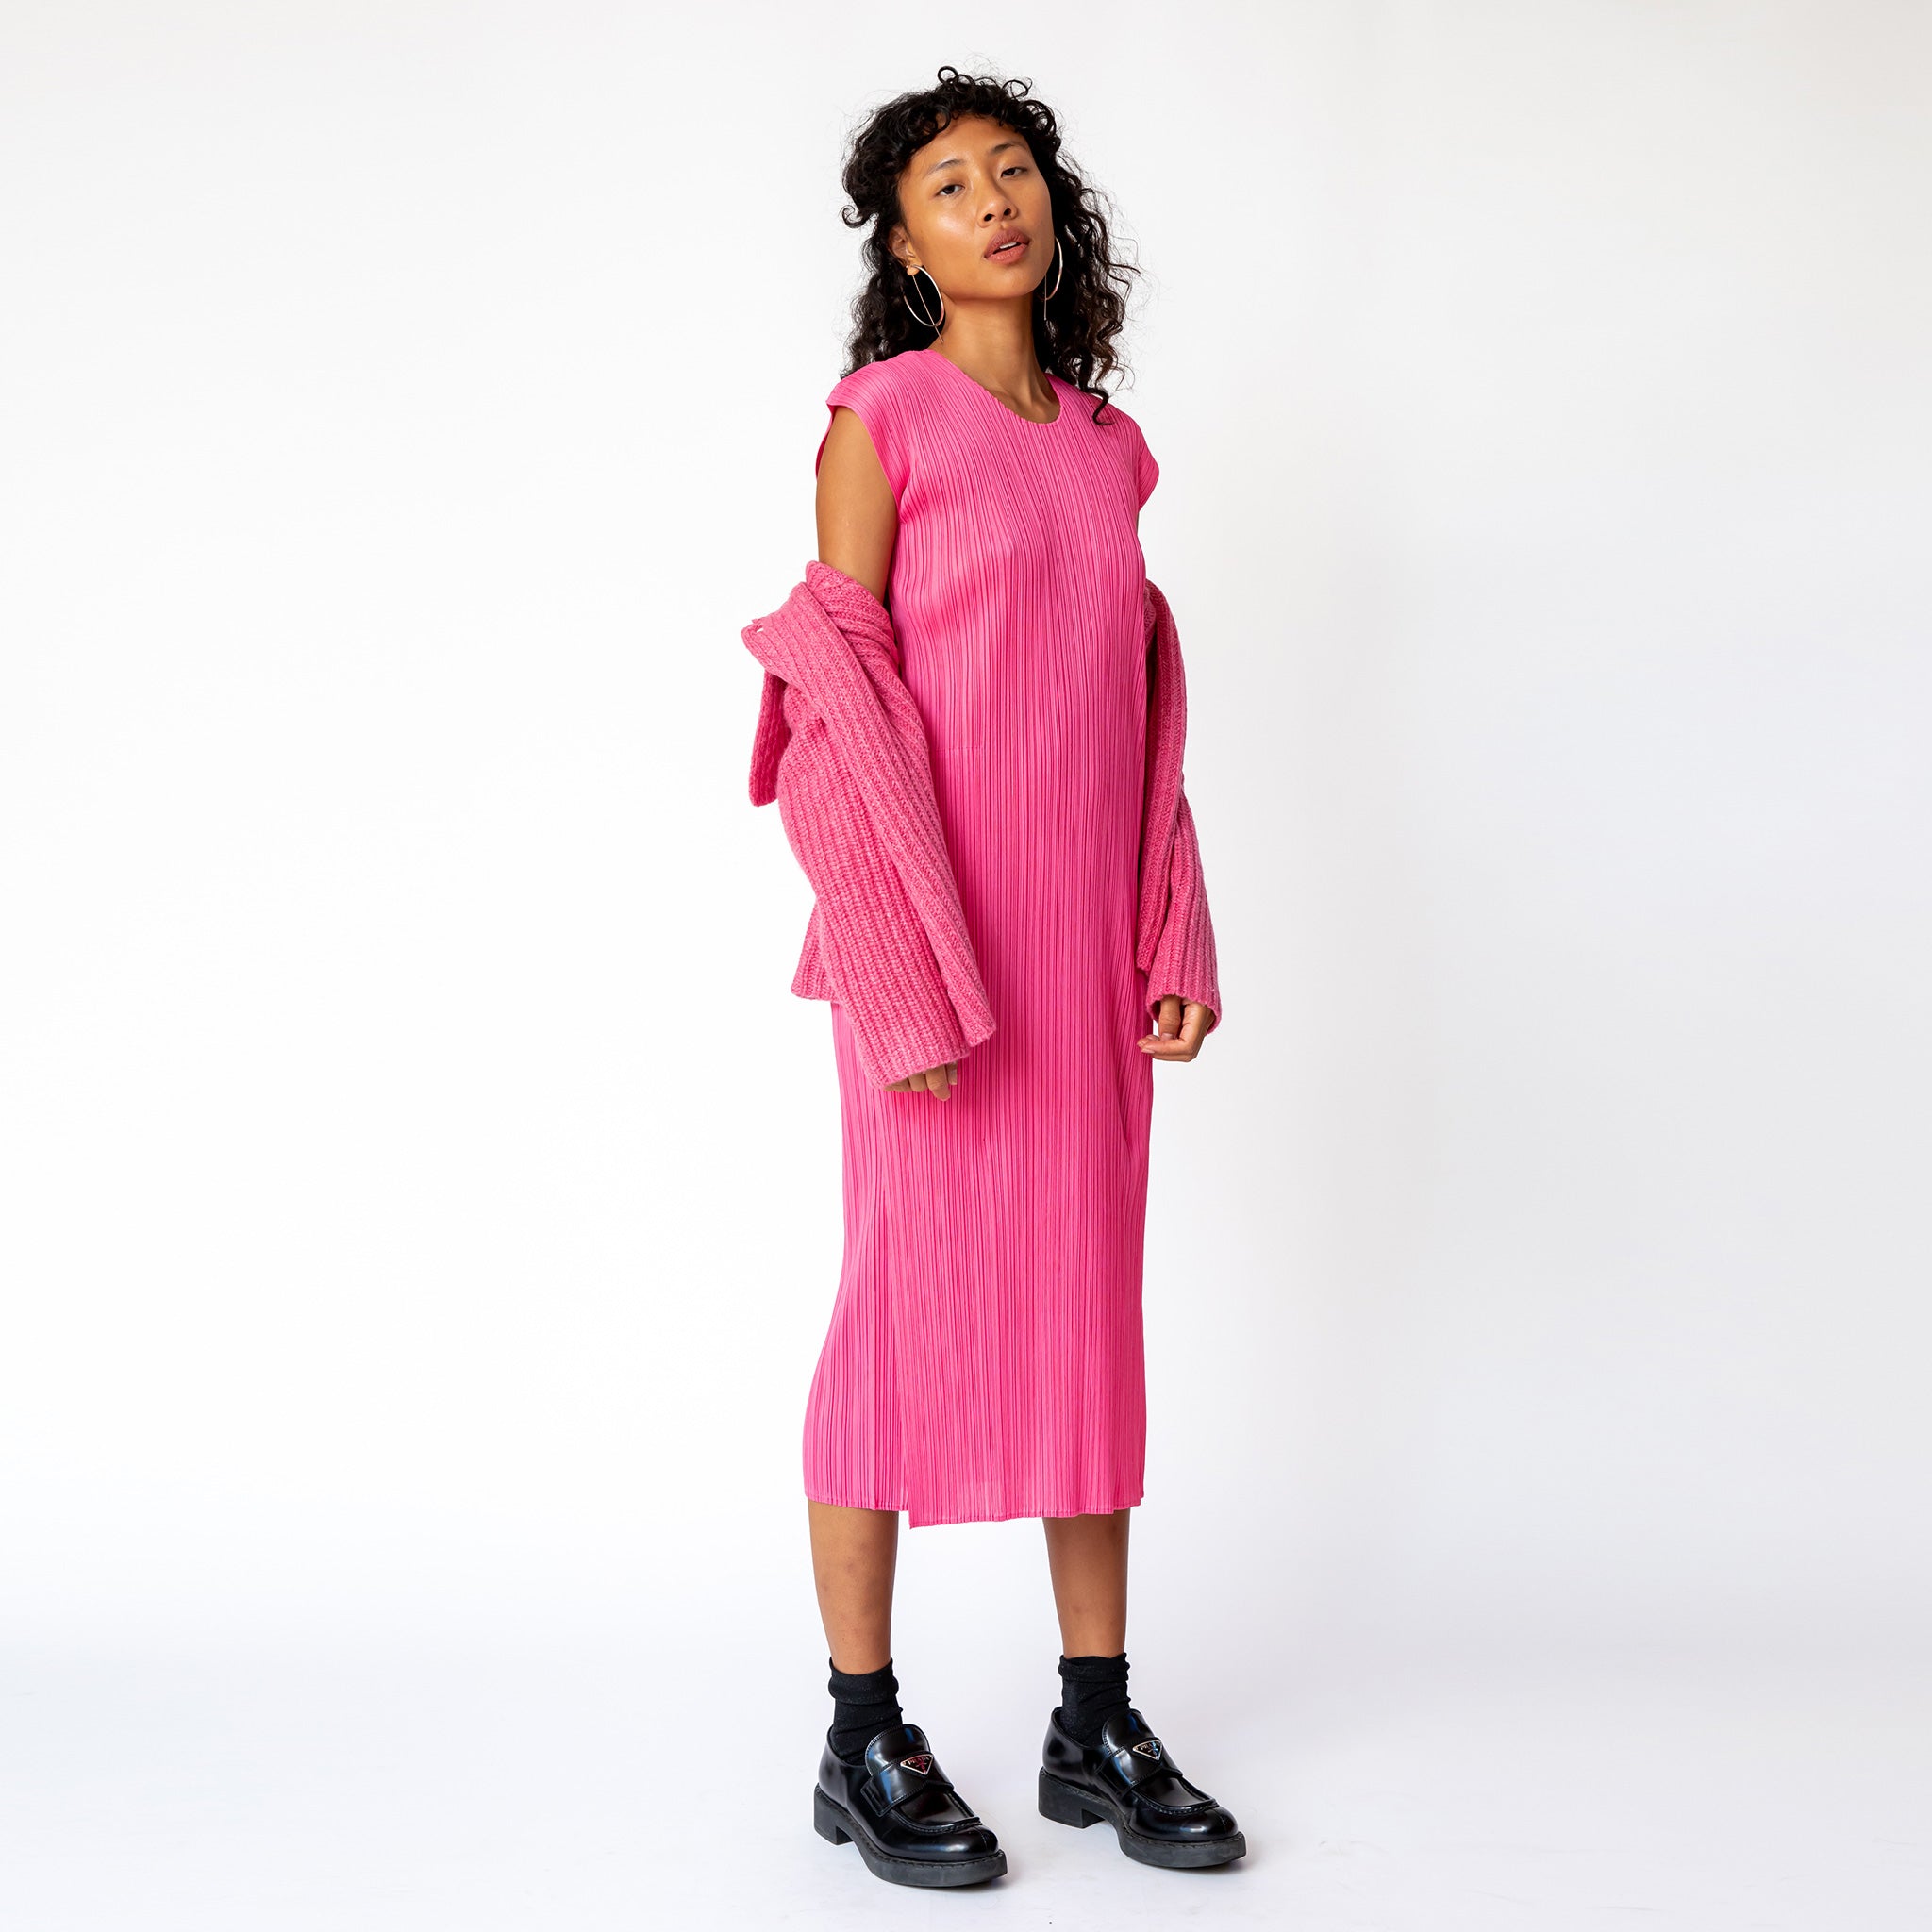 Full body photo of model wearing the pink pawn cardigan and a pleats long pink dress paired with black loafers.